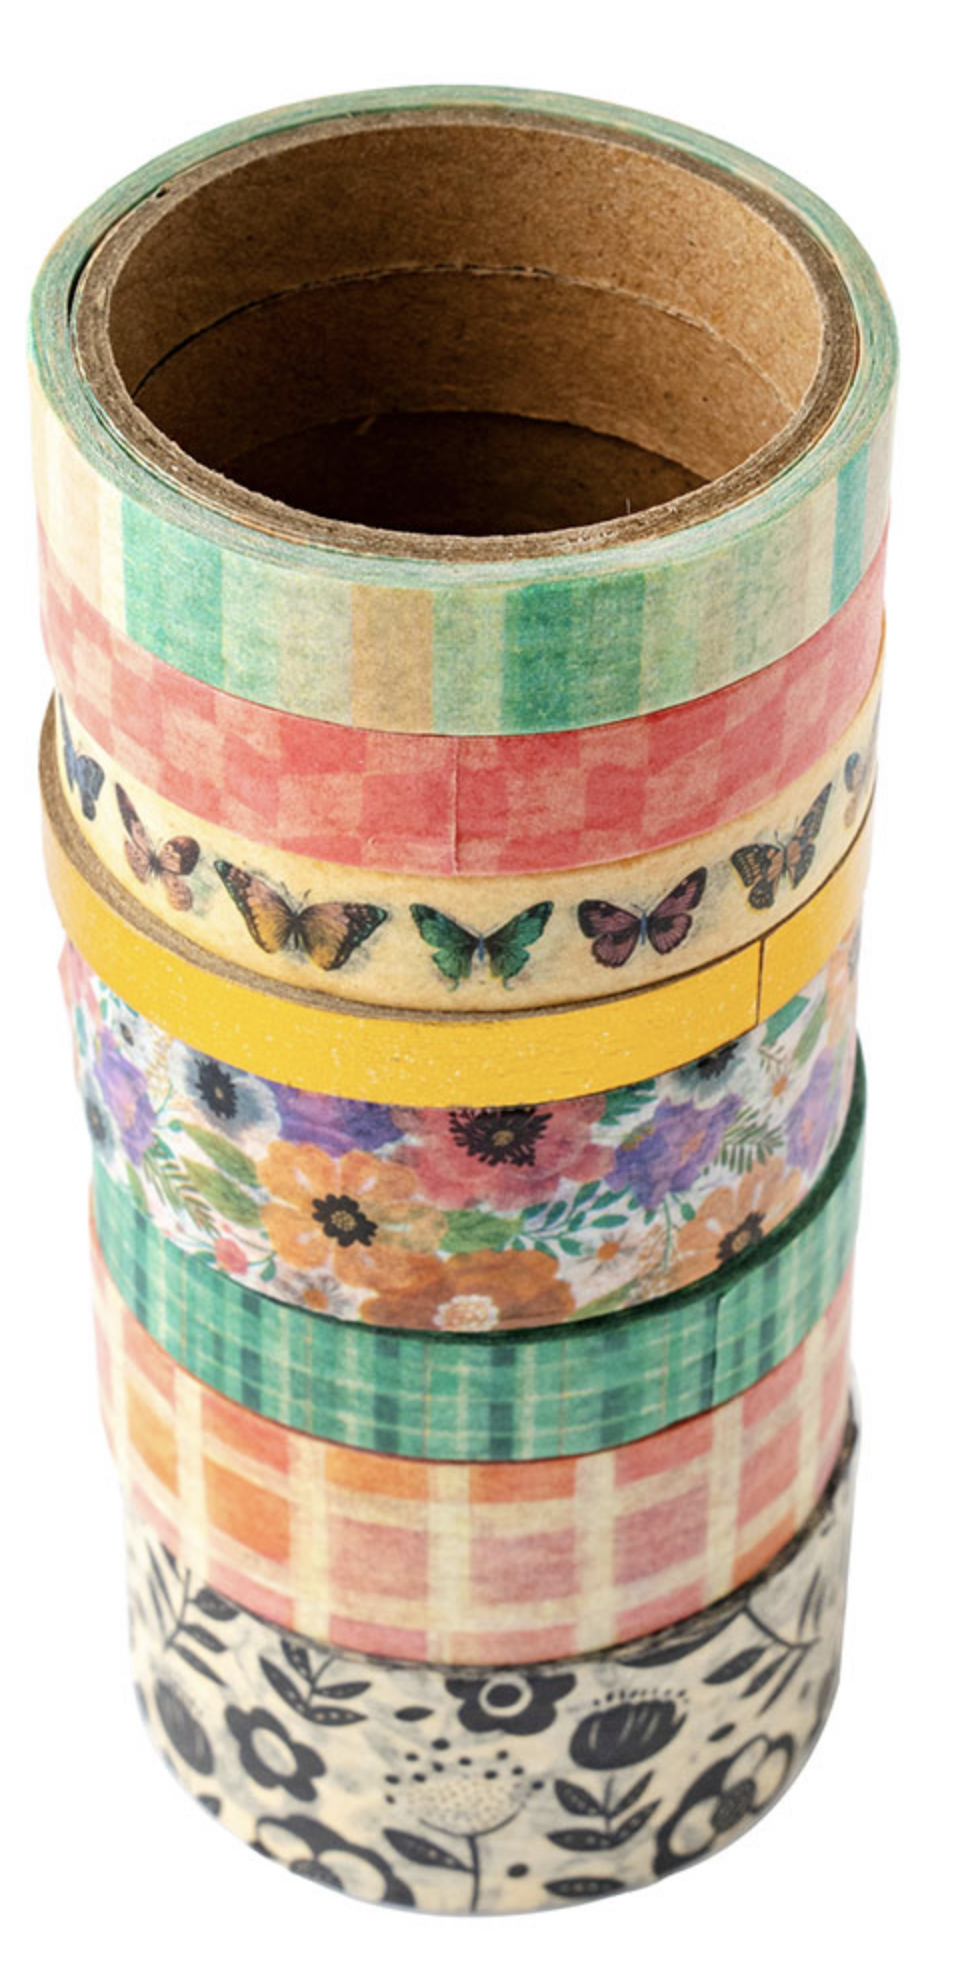 April & Ivy Collection - Washi Tape